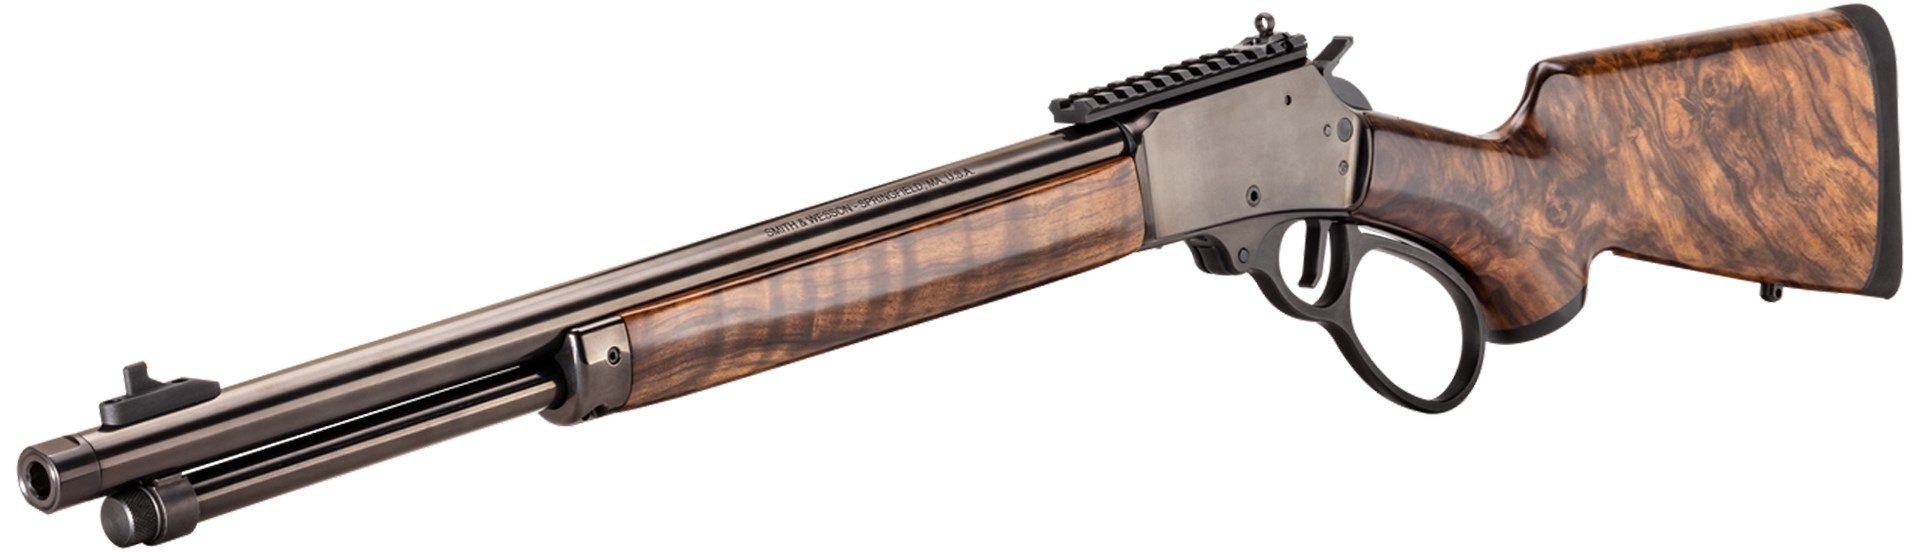 smith & wesson lever-action rifle dynamic angle left-side view stunning walnut stock high gloss finish white background black metal